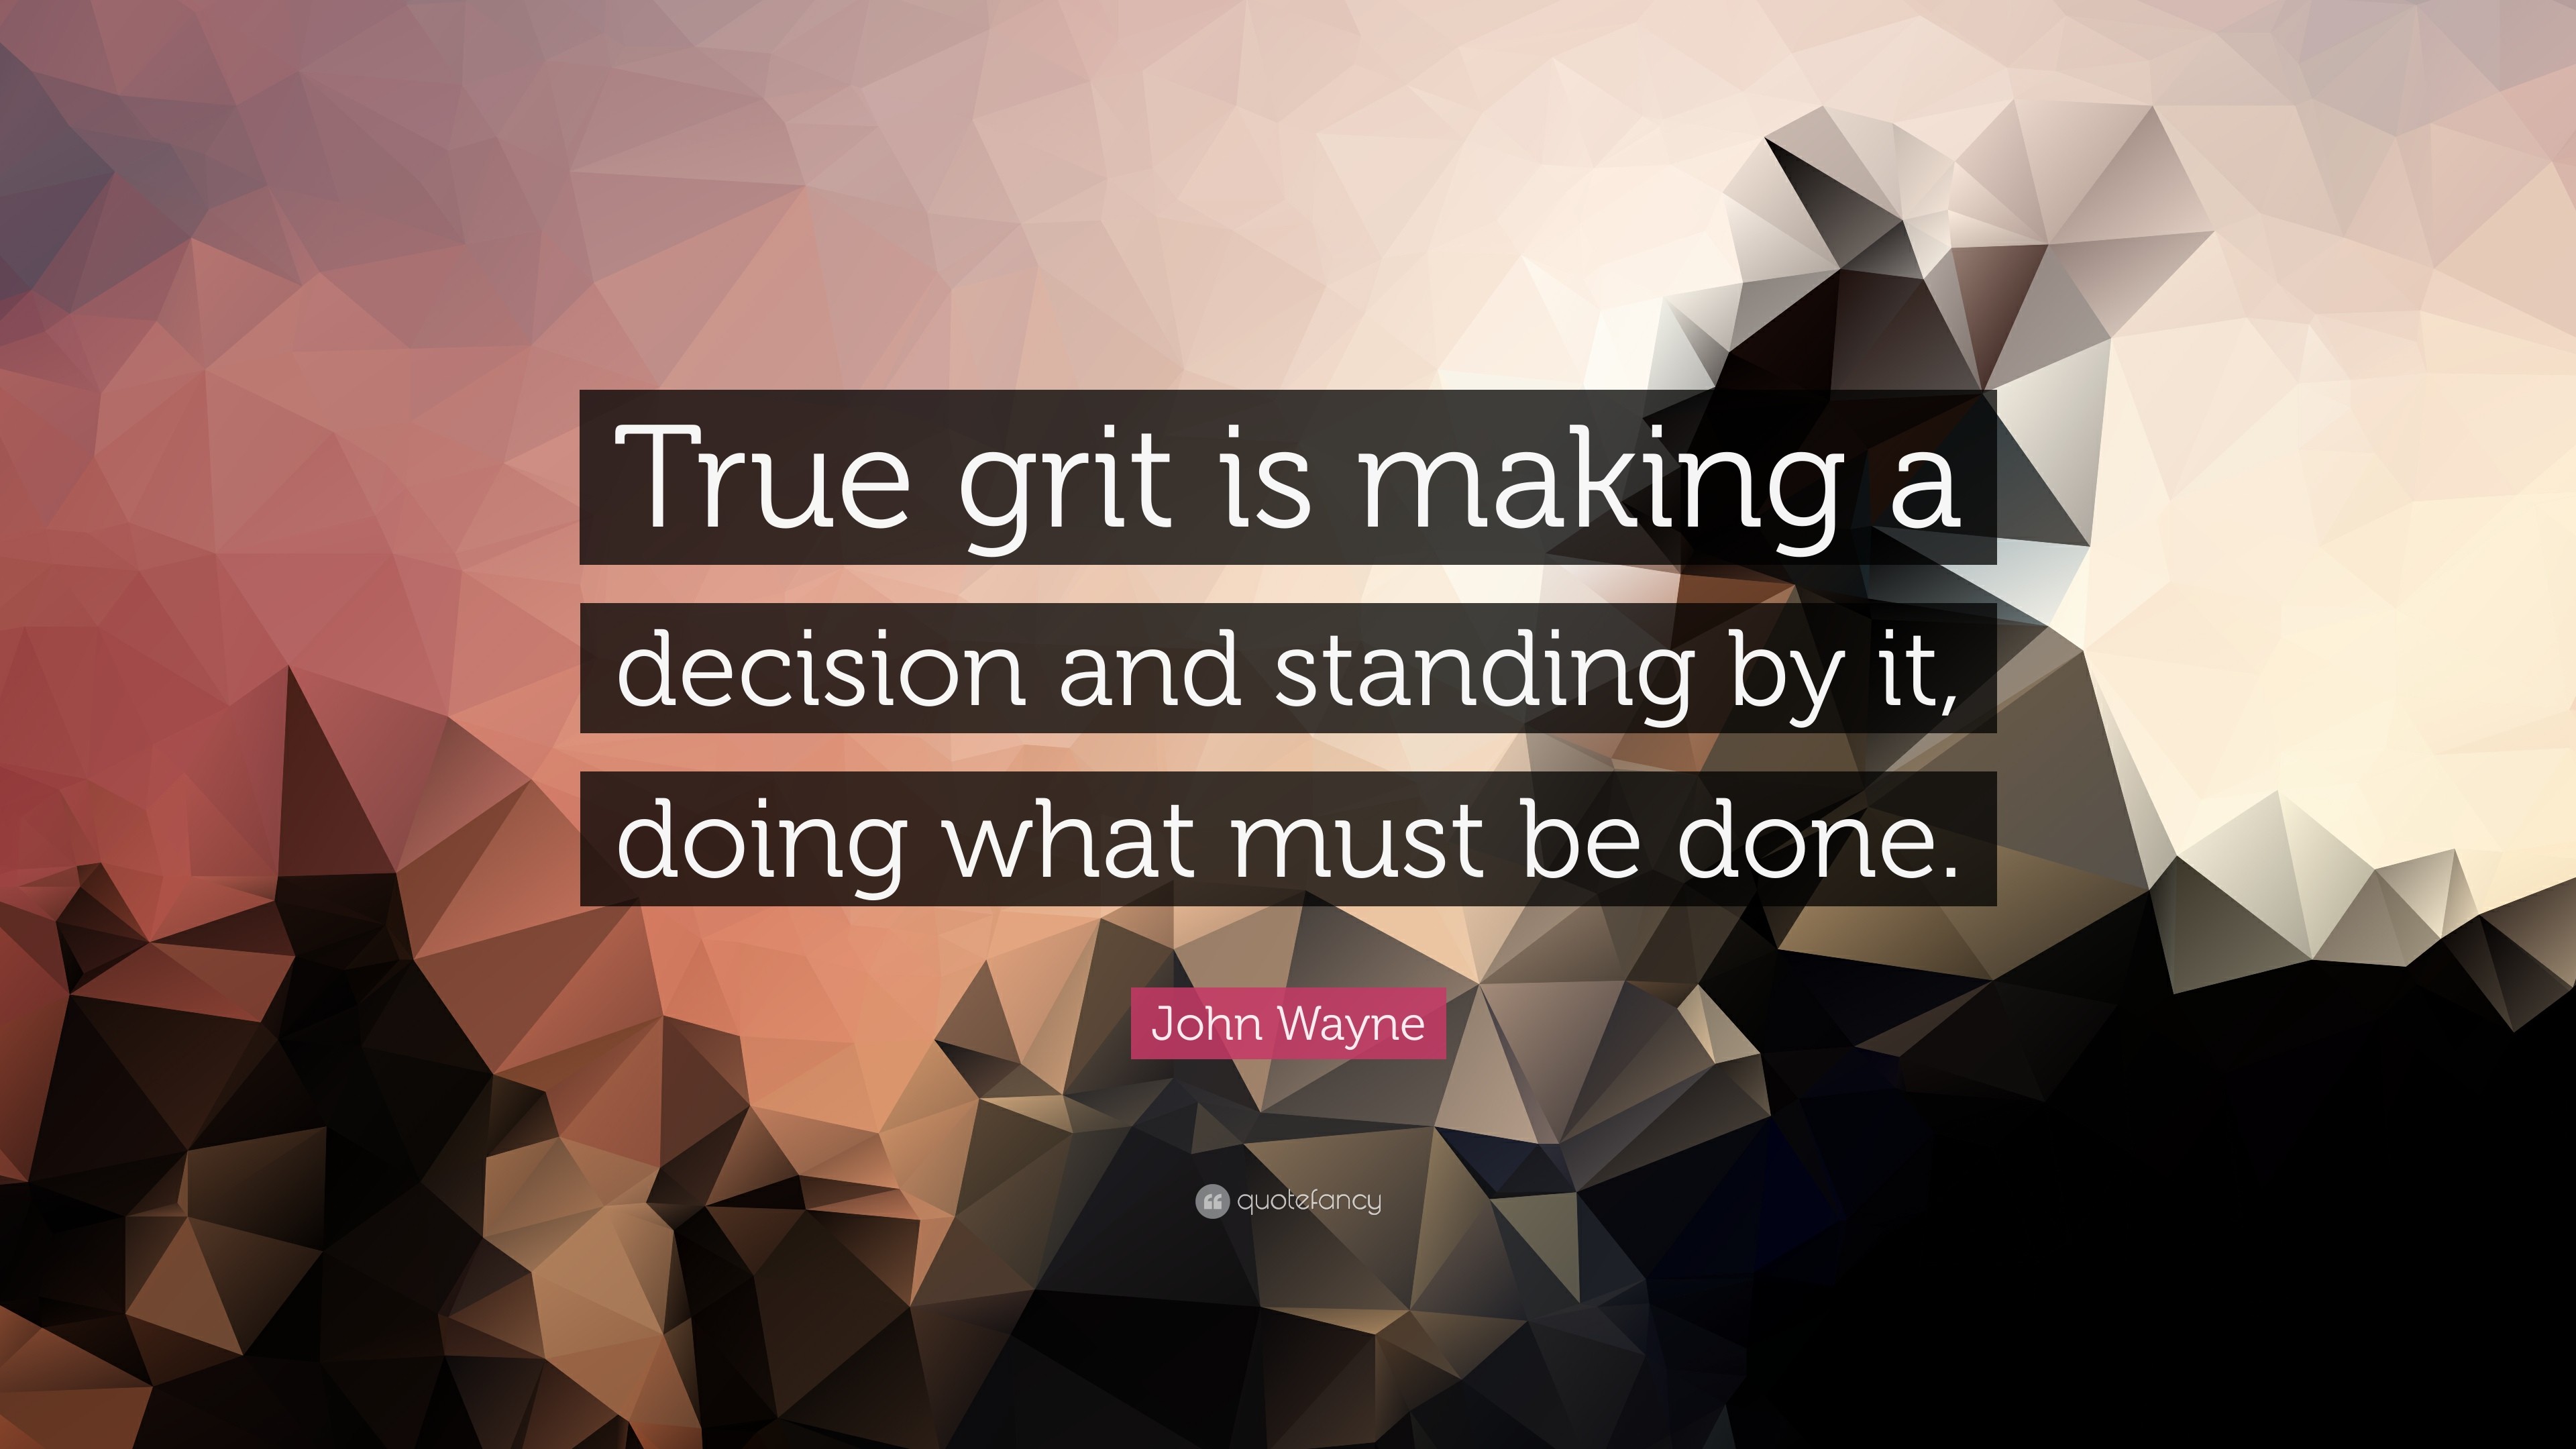 3840x2160 John Wayne Quote: “True grit is making a decision and standing by it,